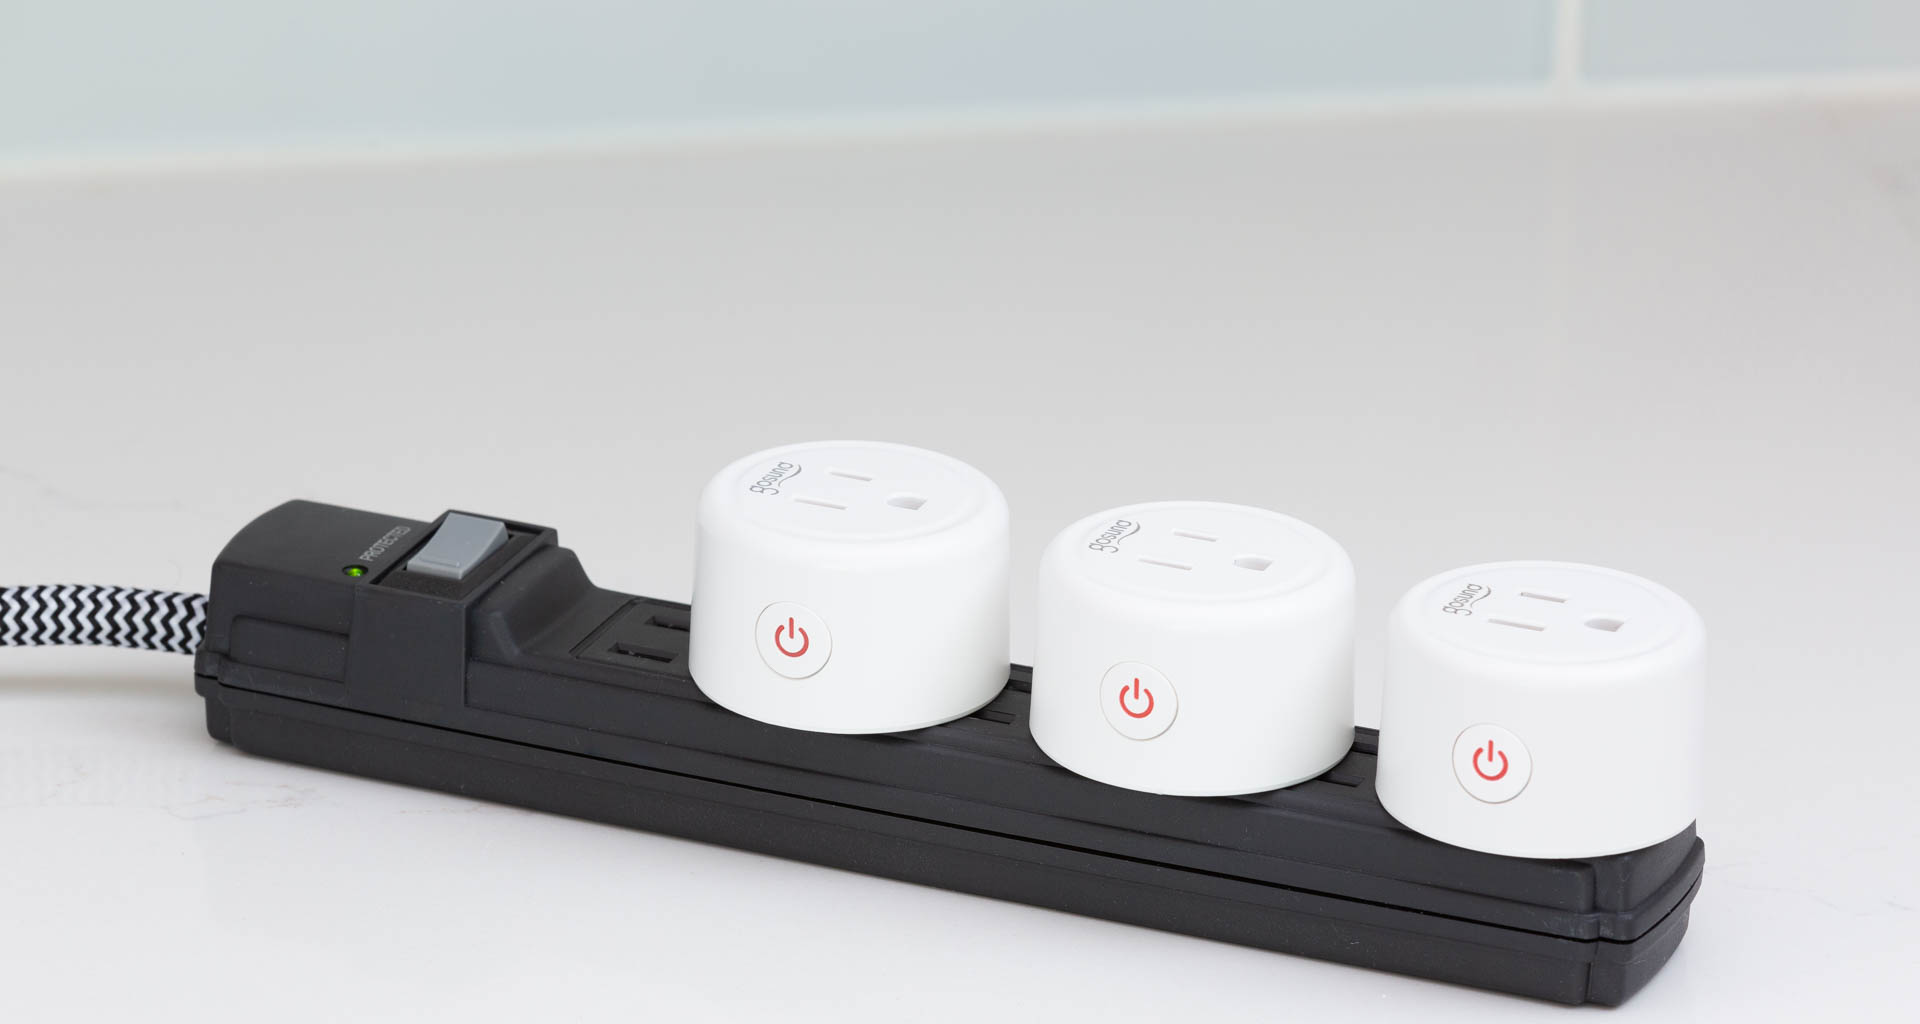 Their compact size makes the Gosund smart plugs an unobtrusive choice for connecting and automating lighting and small appliances. Image: Digitized House Media.